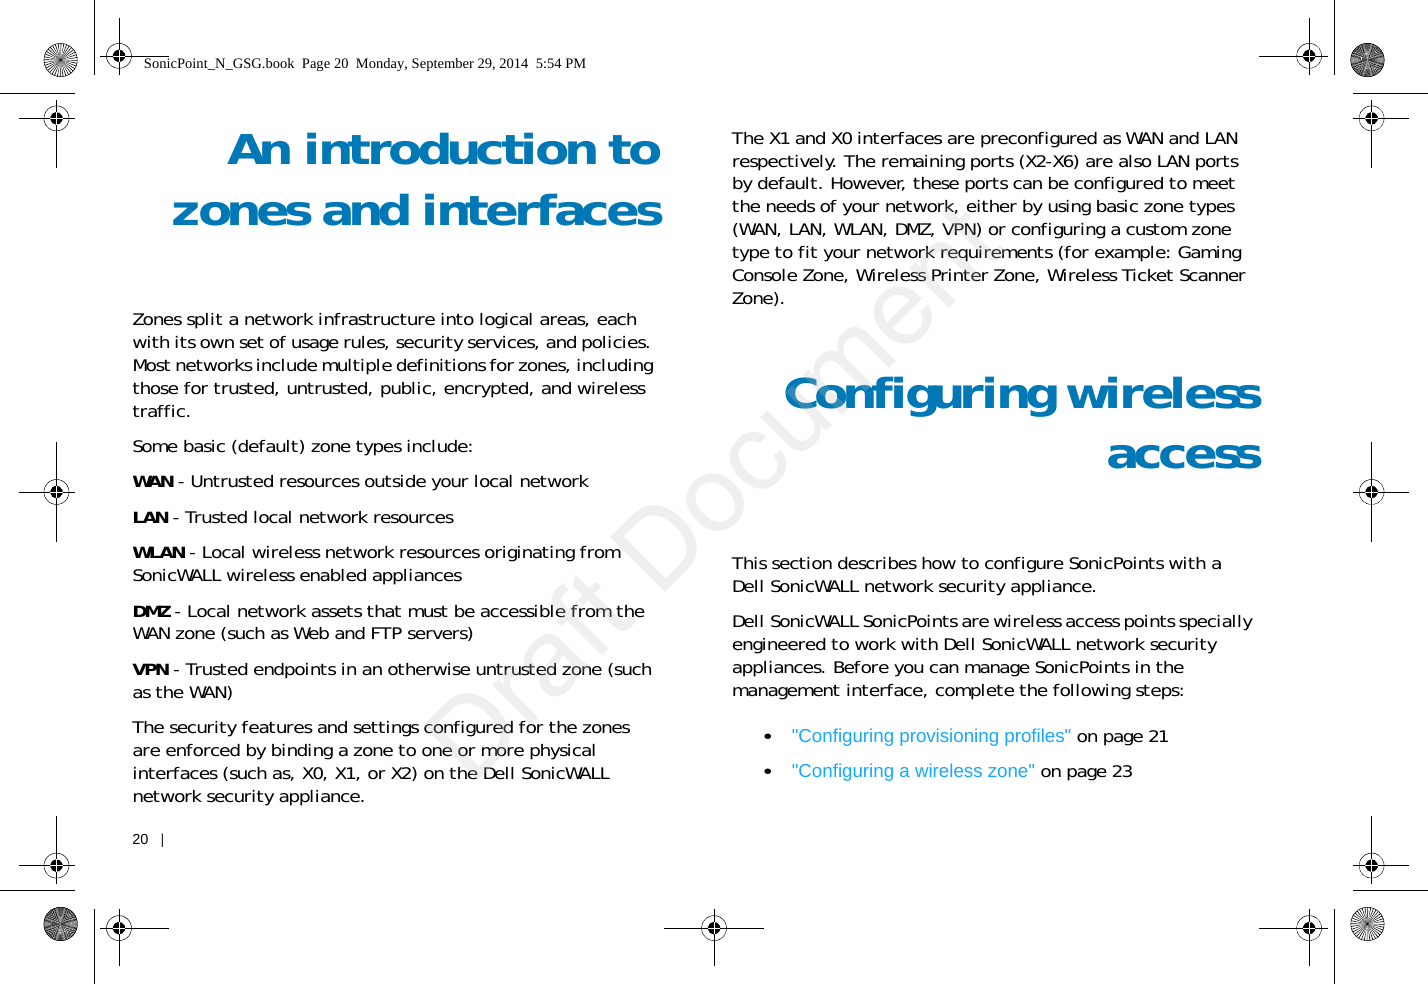 20   |   An introduction tozones and interfacesZones split a network infrastructure into logical areas, each with its own set of usage rules, security services, and policies. Most networks include multiple definitions for zones, including those for trusted, untrusted, public, encrypted, and wireless traffic.Some basic (default) zone types include:WAN - Untrusted resources outside your local networkLAN - Trusted local network resourcesWLAN - Local wireless network resources originating from SonicWALL wireless enabled appliancesDMZ - Local network assets that must be accessible from the WAN zone (such as Web and FTP servers)VPN - Trusted endpoints in an otherwise untrusted zone (such as the WAN)The security features and settings configured for the zones are enforced by binding a zone to one or more physical interfaces (such as, X0, X1, or X2) on the Dell SonicWALL network security appliance.The X1 and X0 interfaces are preconfigured as WAN and LAN respectively. The remaining ports (X2-X6) are also LAN ports by default. However, these ports can be configured to meet the needs of your network, either by using basic zone types (WAN, LAN, WLAN, DMZ, VPN) or configuring a custom zone type to fit your network requirements (for example: Gaming Console Zone, Wireless Printer Zone, Wireless Ticket Scanner Zone).Configuring wirelessaccessThis section describes how to configure SonicPoints with a Dell SonicWALL network security appliance. Dell SonicWALL SonicPoints are wireless access points specially engineered to work with Dell SonicWALL network security appliances. Before you can manage SonicPoints in the management interface, complete the following steps: •&quot;Configuring provisioning profiles&quot; on page 21•&quot;Configuring a wireless zone&quot; on page 23SonicPoint_N_GSG.book  Page 20  Monday, September 29, 2014  5:54 PMDraft Document